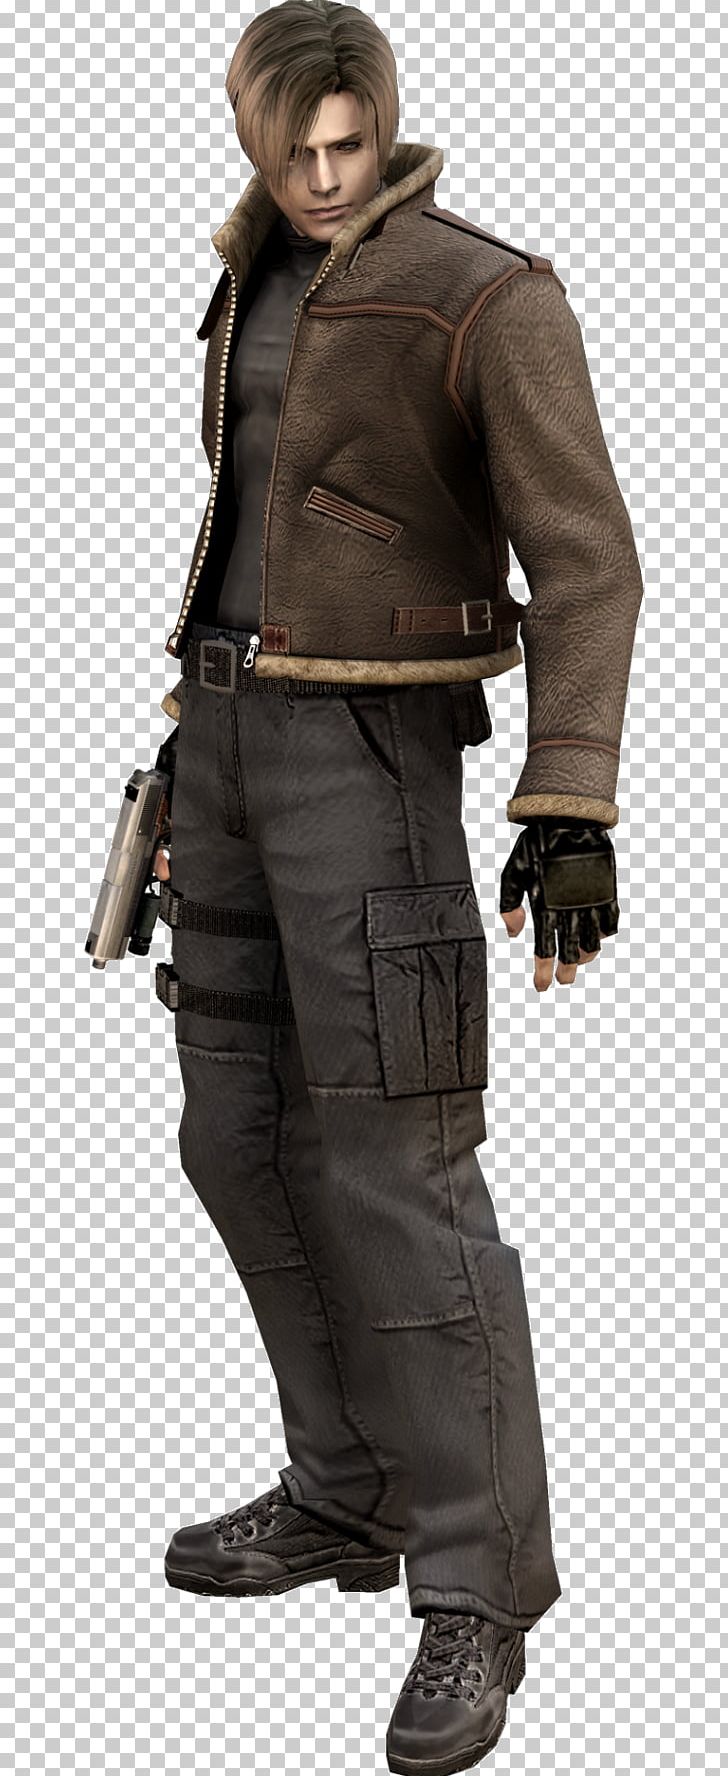 Resident Evil 4 Resident Evil 6 Resident Evil 2 Minecraft Leon S. Kennedy PNG, Clipart, Action Figure, Capcom, Character, Chris Redfield, Costume Free PNG Download